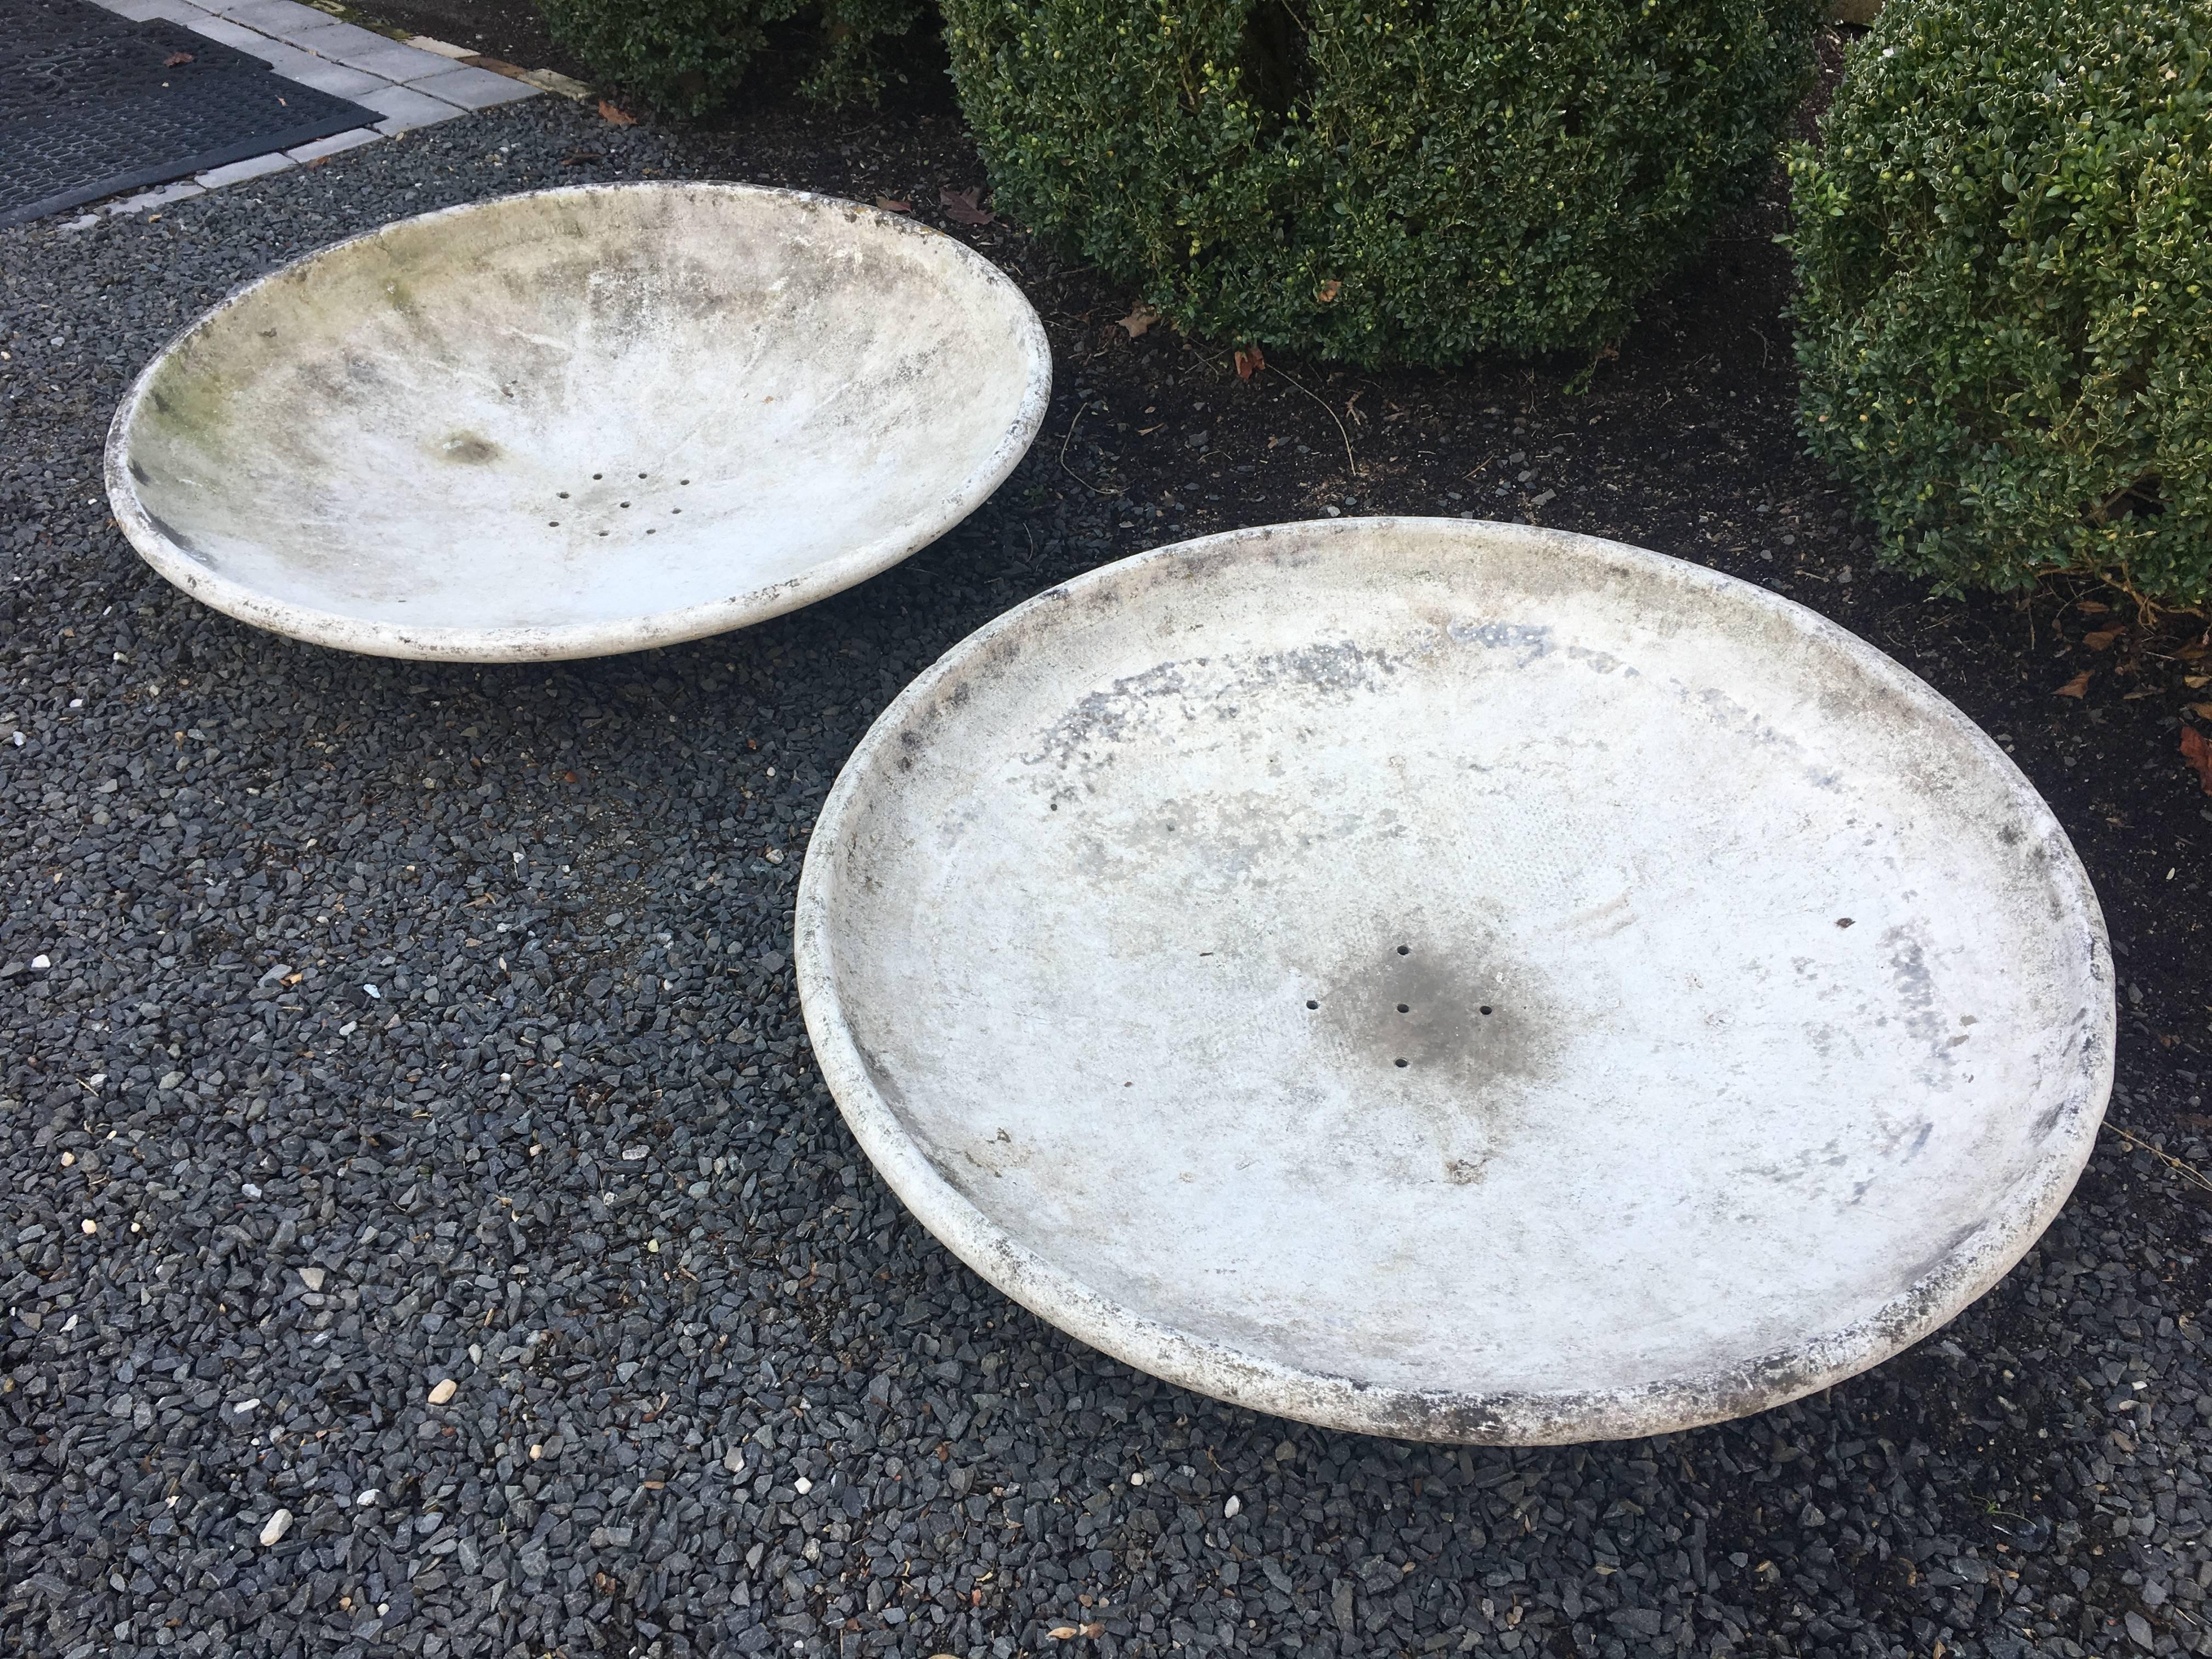 This great pair of fiber cement saucer planters was designed by the iconic Willy Guhl and manufactured by Eternit, SA of Switzerland in the 1950s. They would be perfect flanking the entrance to a beach house or contemporary garden filled with wavy